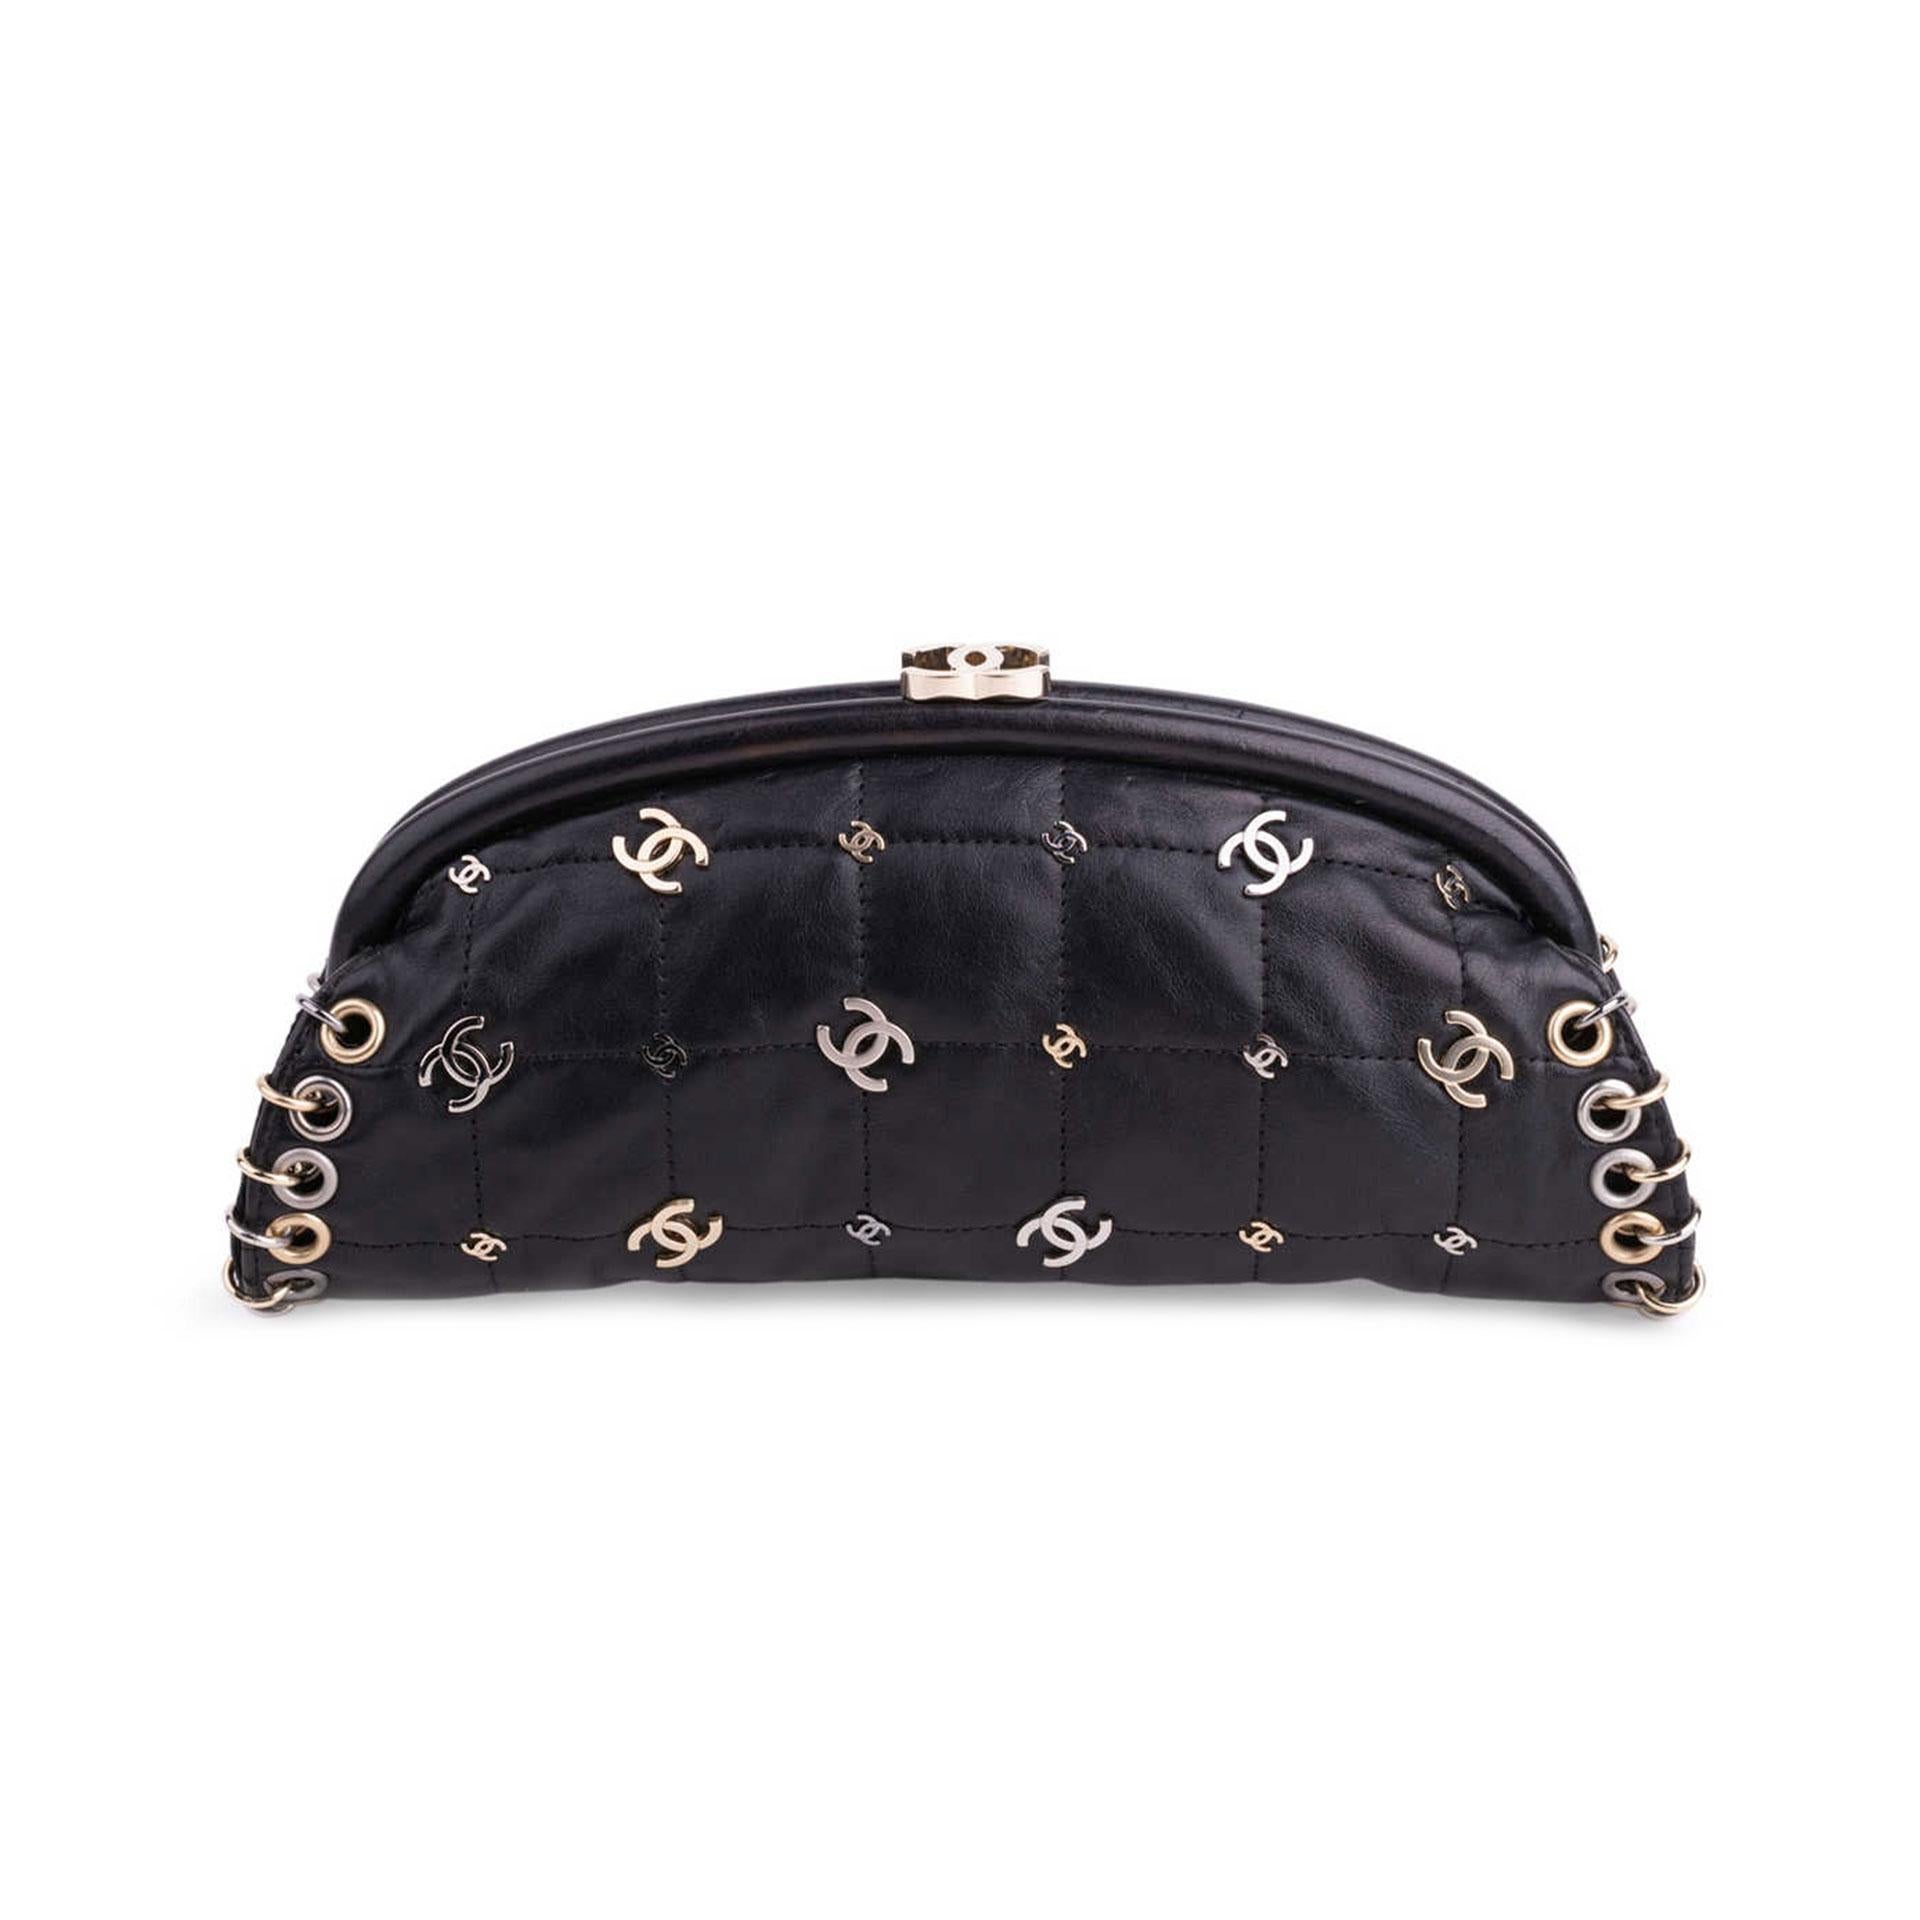 Chanel Spring 2007 Limited Edition Charm Rare Black Leather Clutch For Sale 2